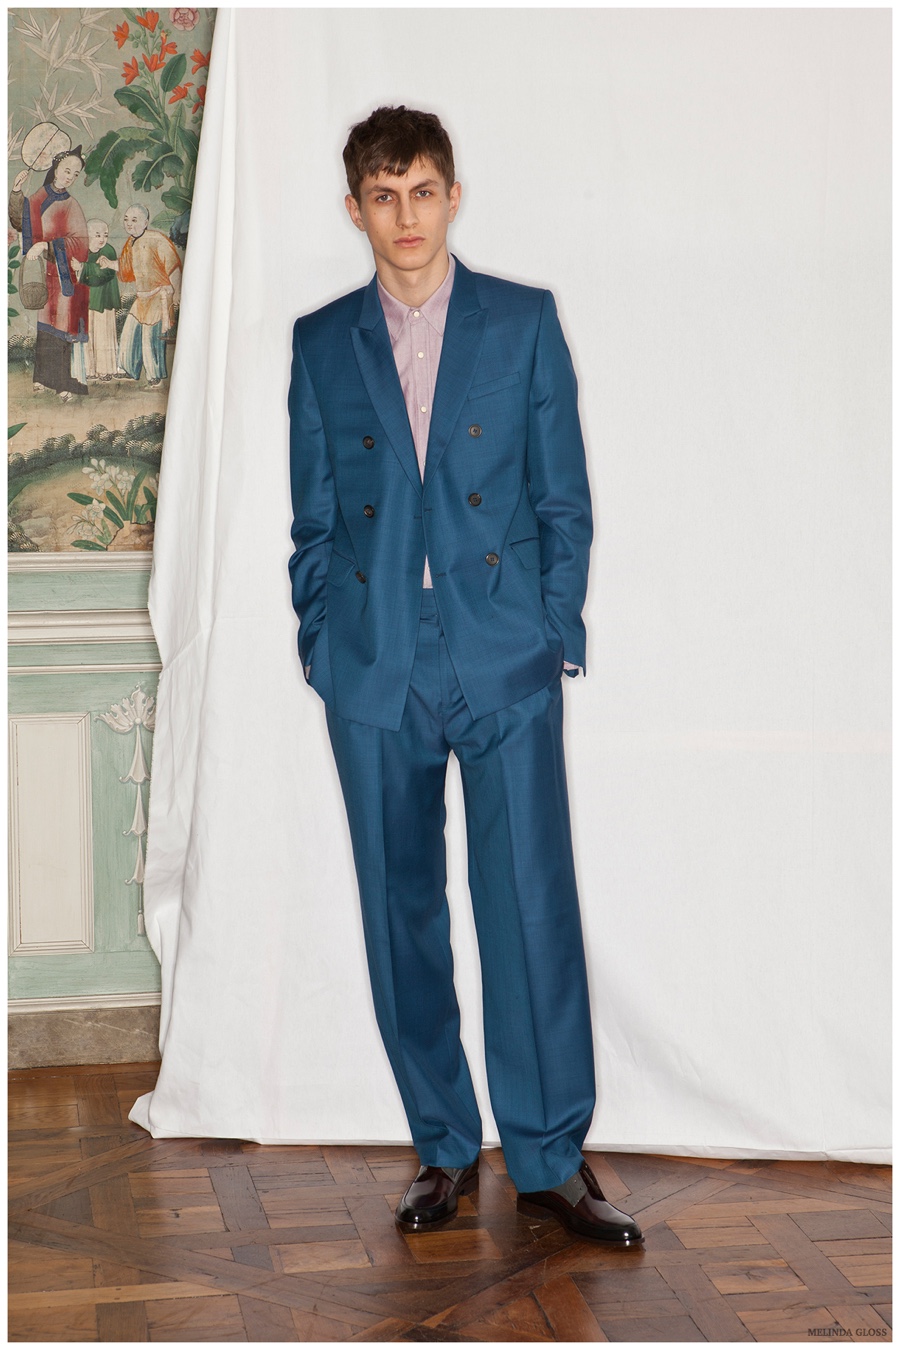 Melinda Gloss Fall/Winter 2015 Menswear Collection Inspired by Roaring 20s Style